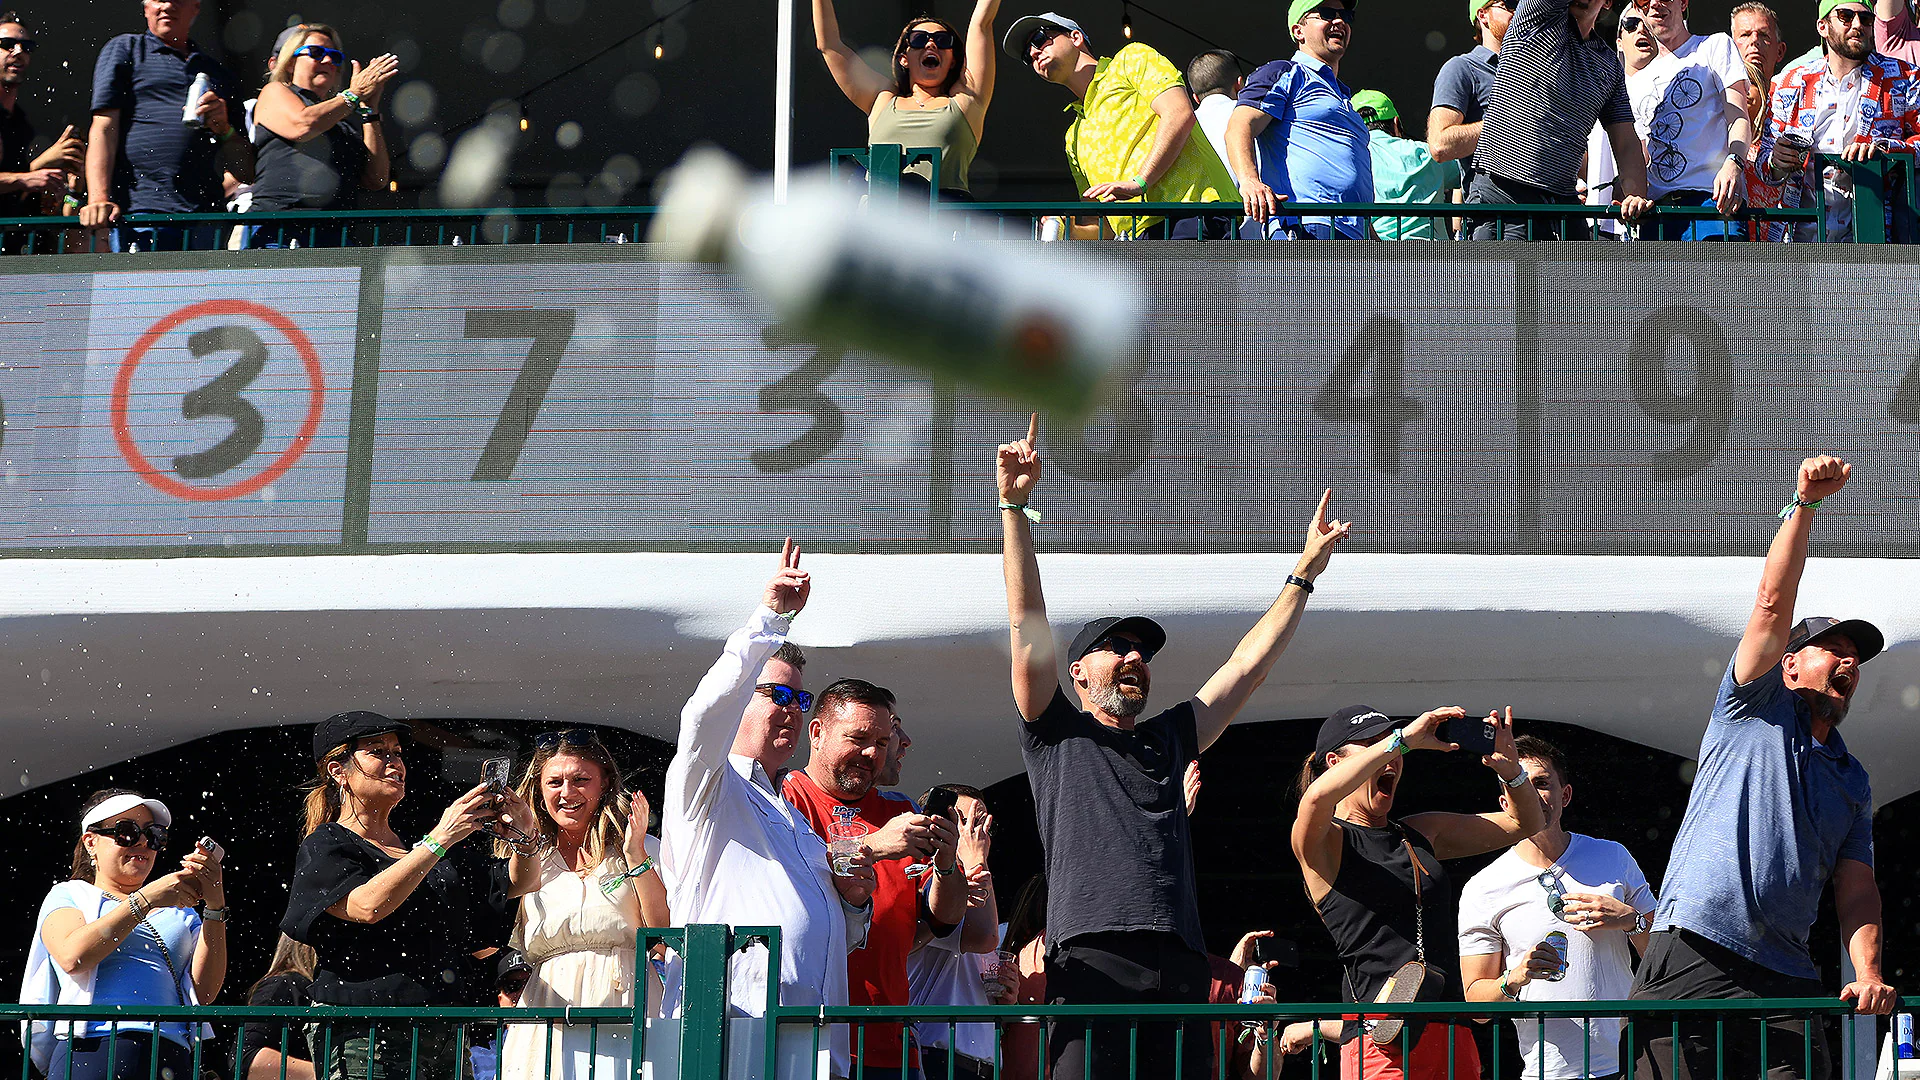 Players like the TPC Scottsdale enthusiasm, minus the beer-can throws 2